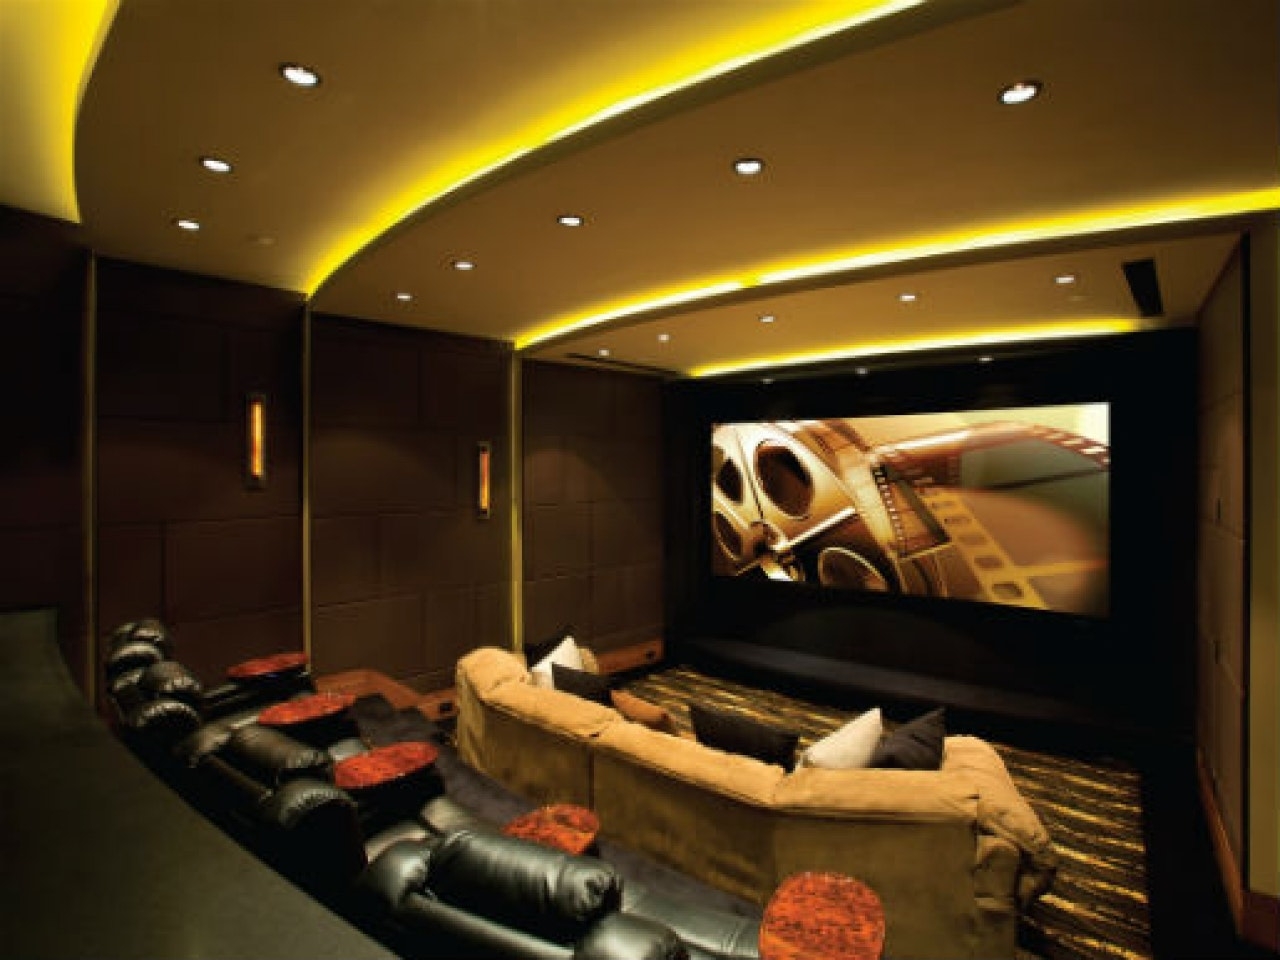 Home Theater Ceiling Led Lighting1280 X 960